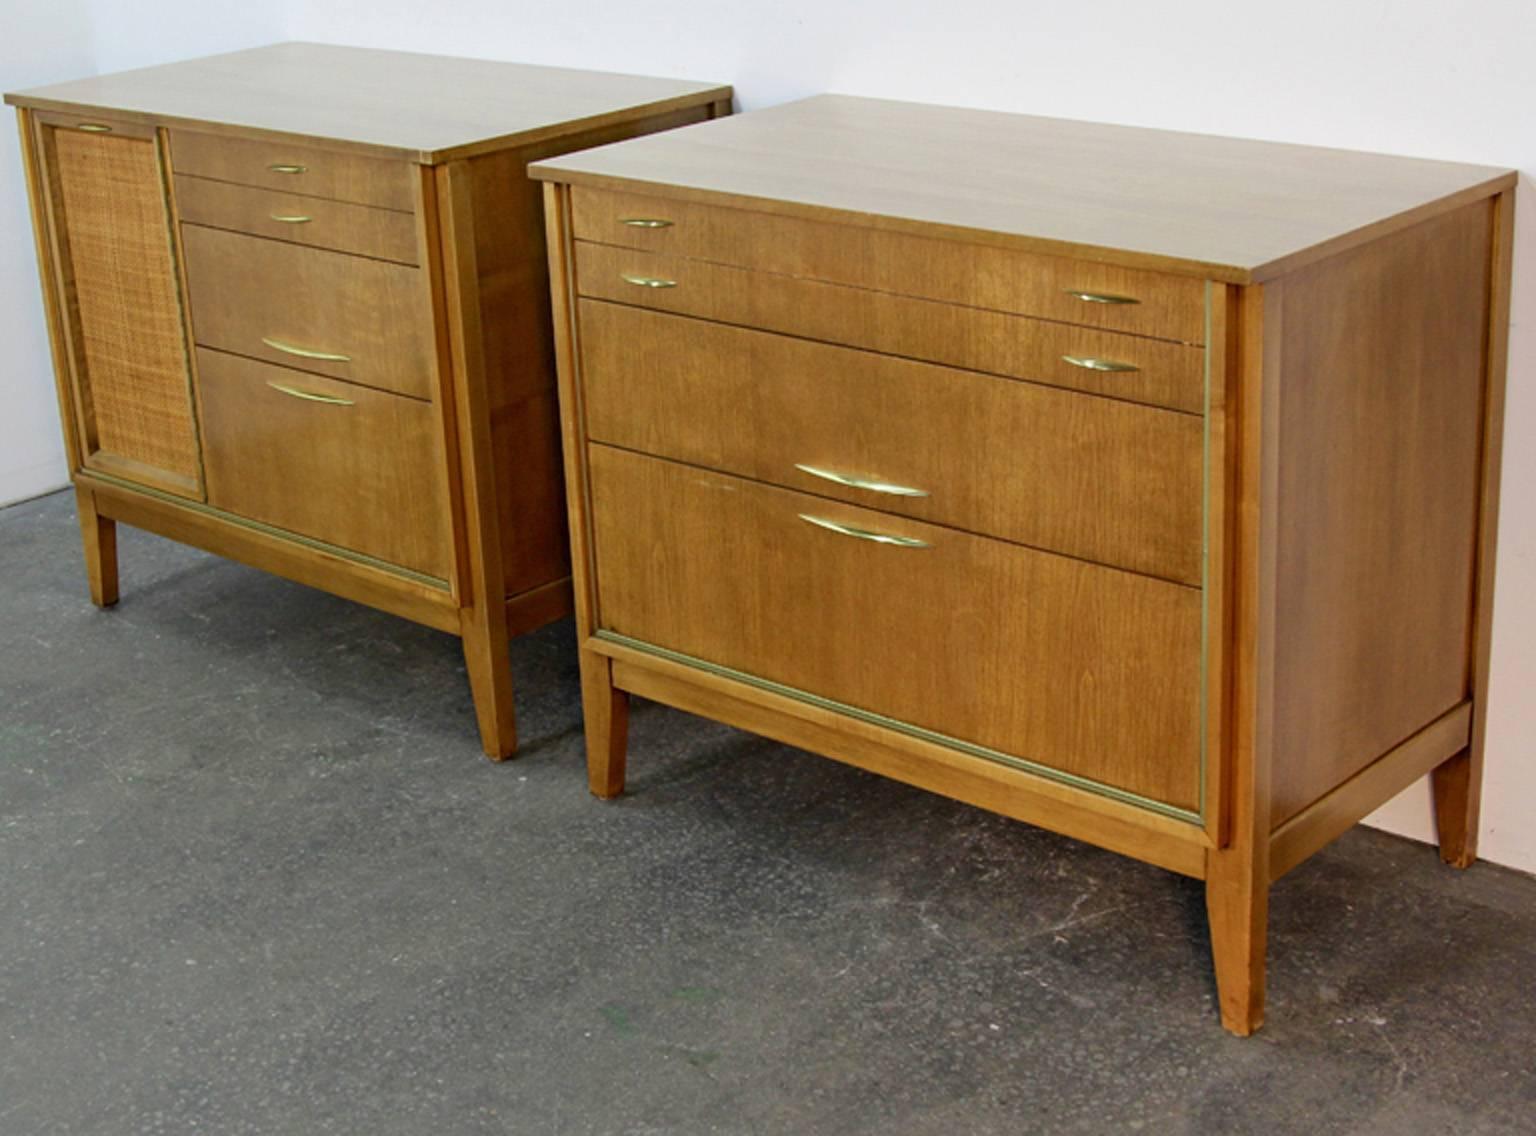 Pair of Midcentury Chests with Brass Detail In Excellent Condition For Sale In Bridport, CT